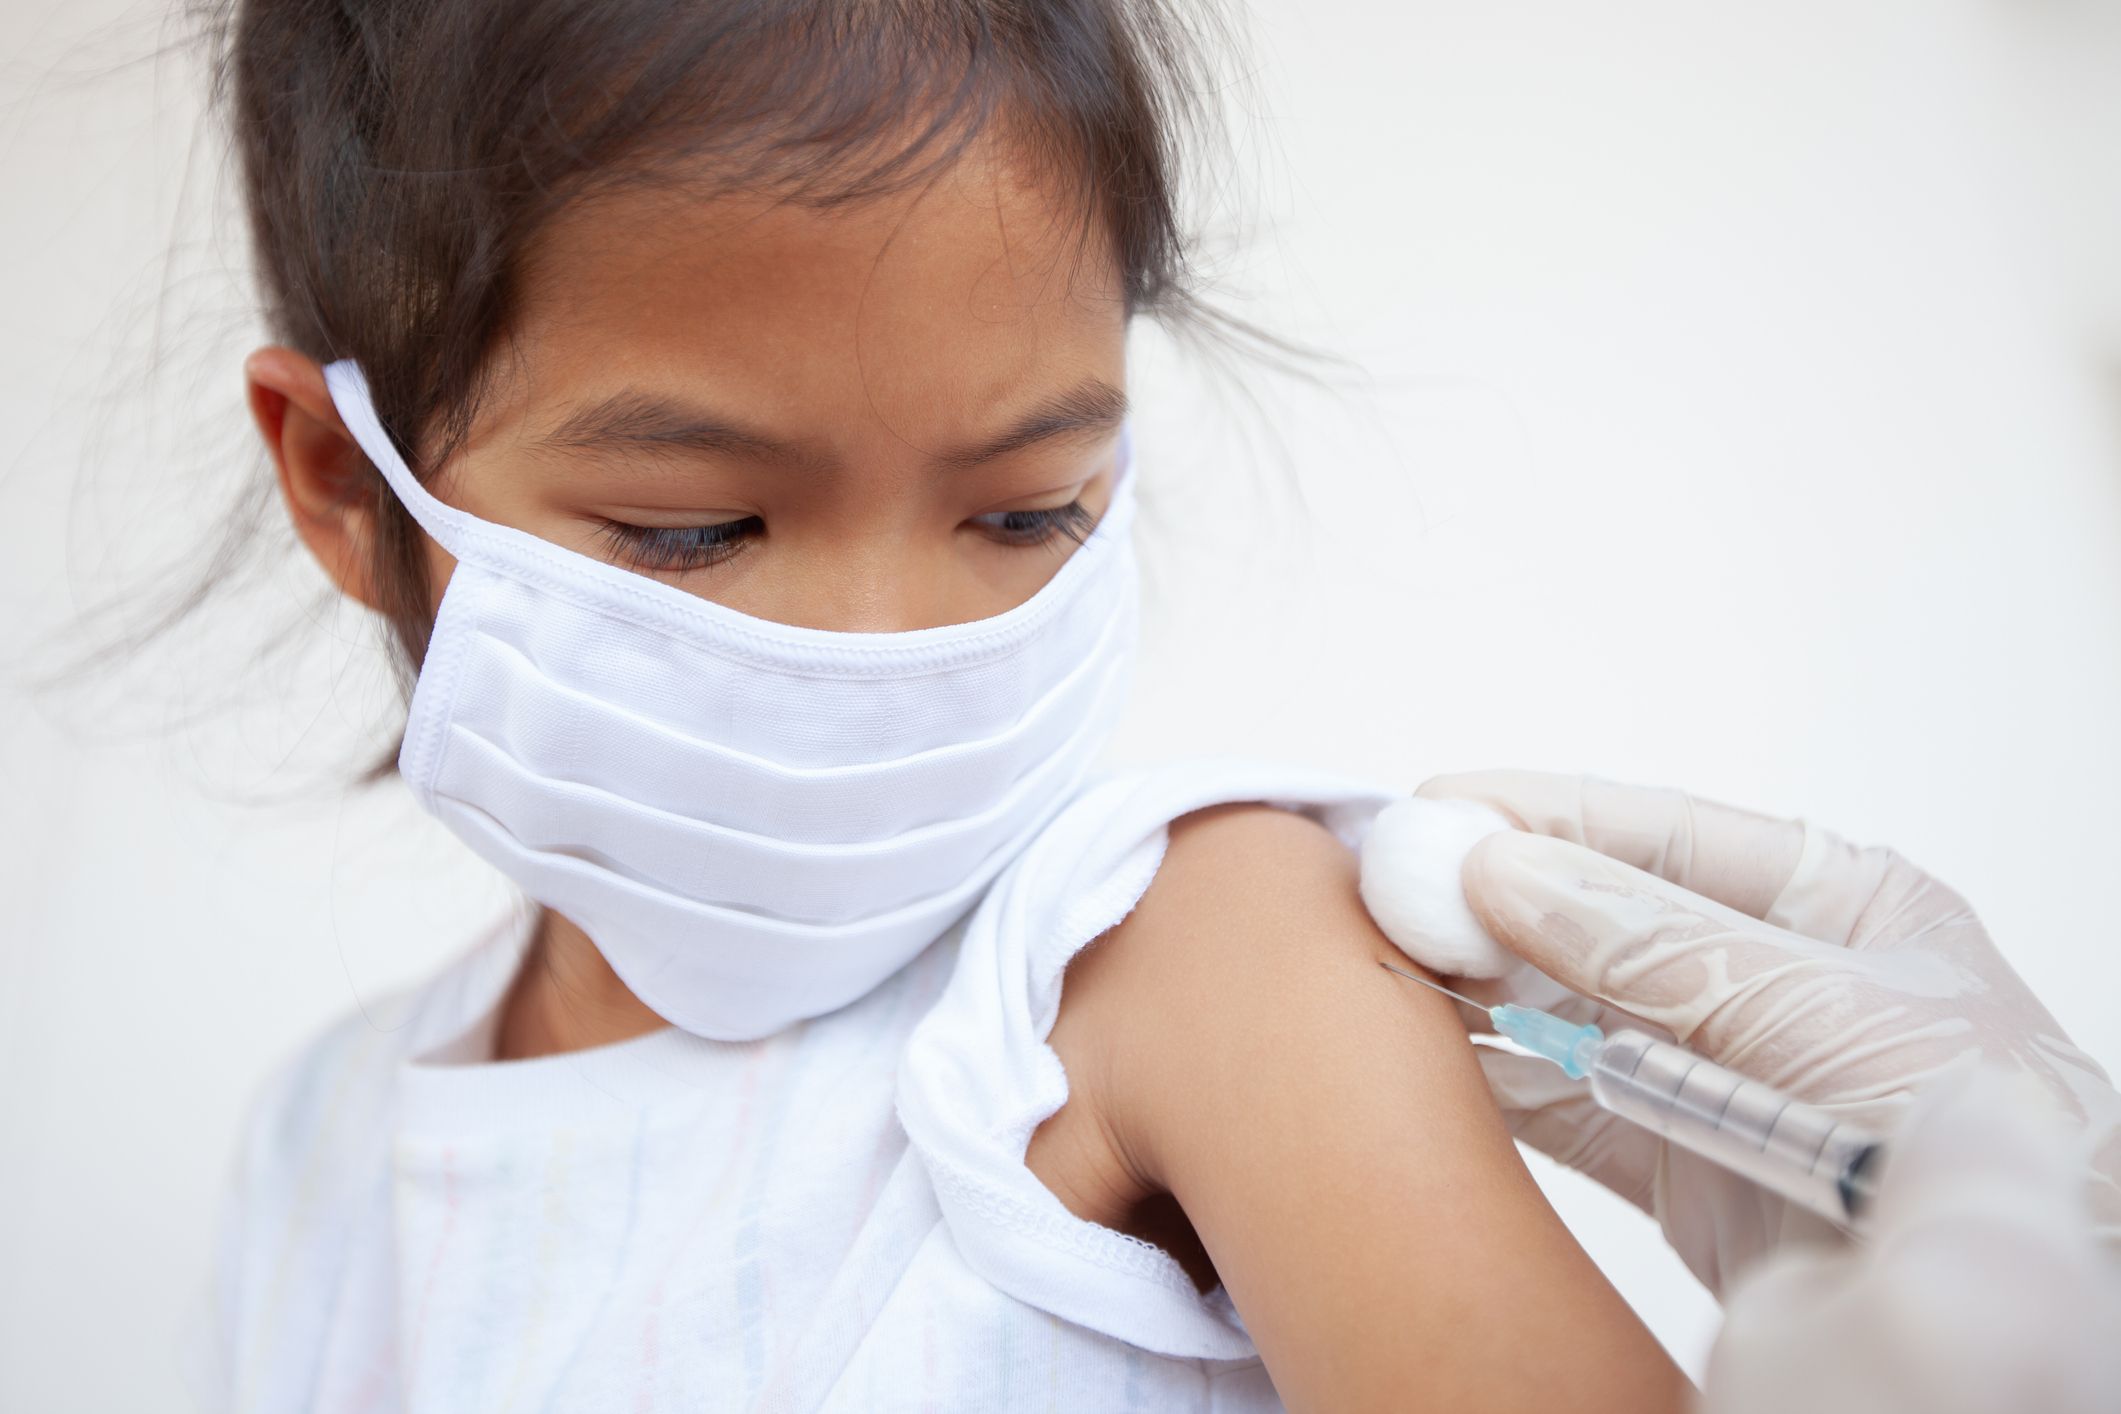 Experts say urgent action is needed to prevent future measles epidemics.